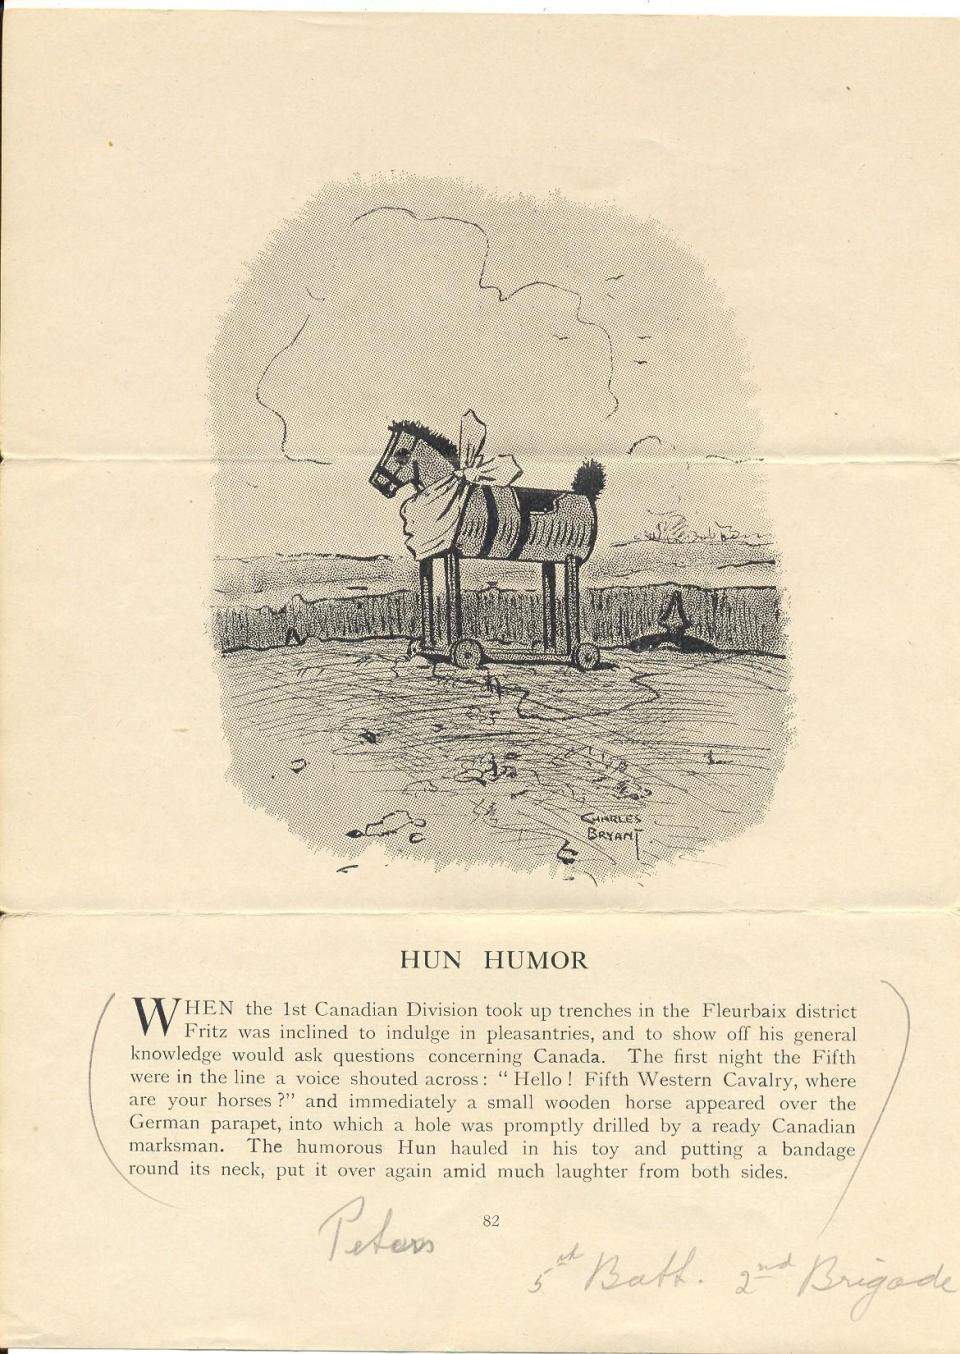 Page 2
Printed Matter from
5th Canadian Battalion
1st Canadian Division
Humorous Story "Hun Horse"